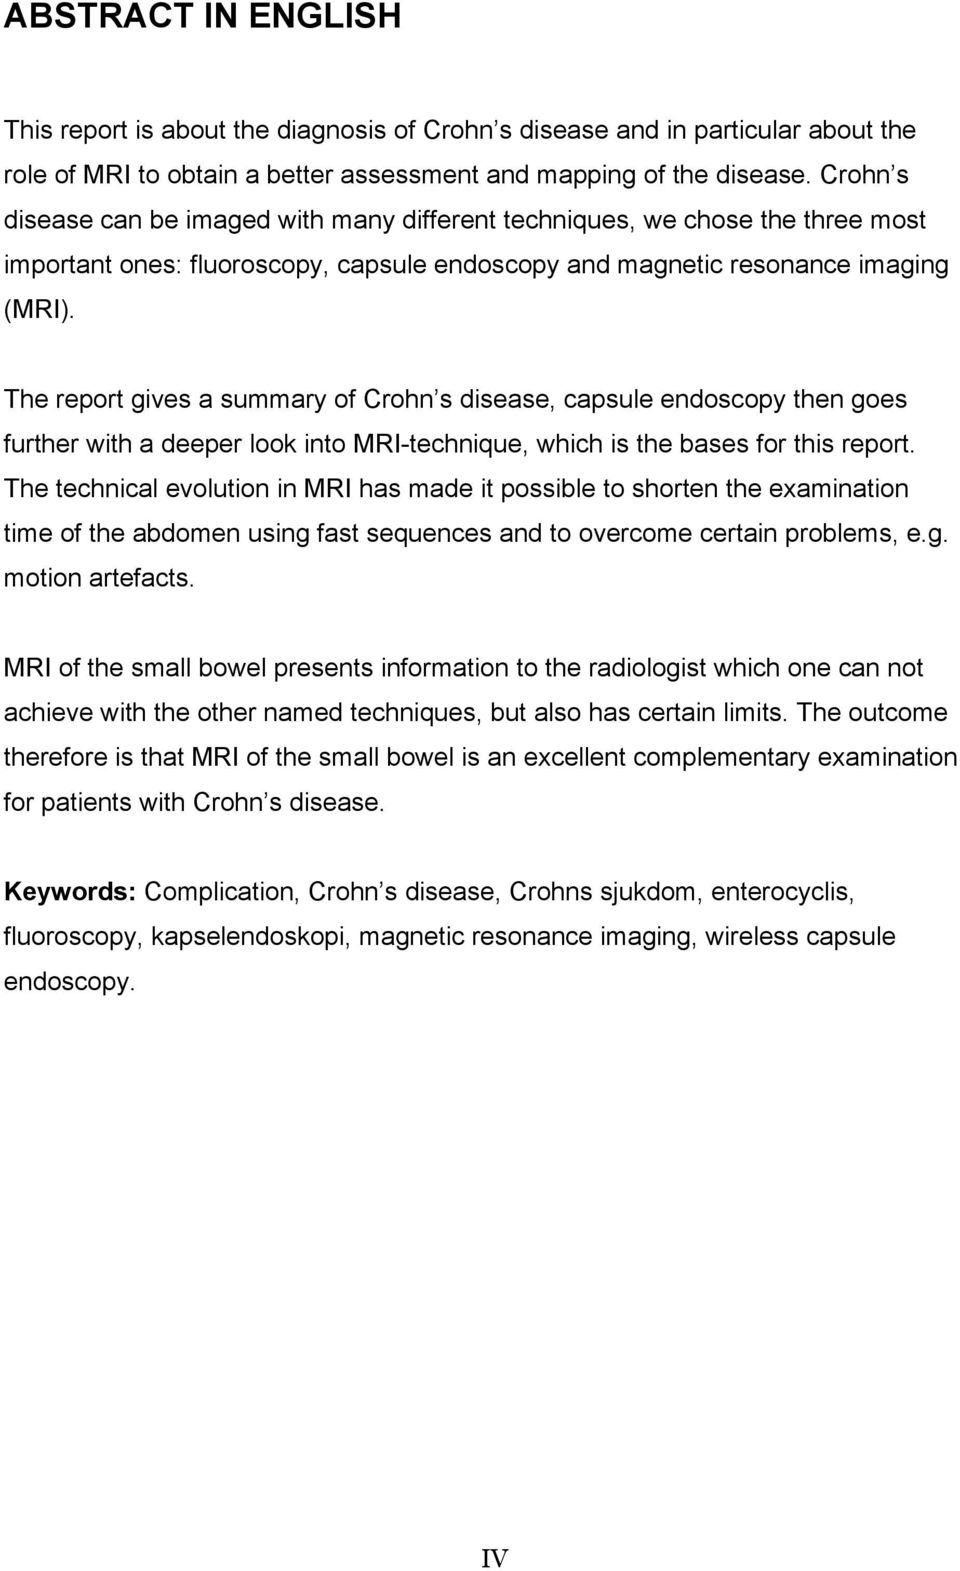 The report gives a summary of Crohn s disease, capsule endoscopy then goes further with a deeper look into MRI-technique, which is the bases for this report.